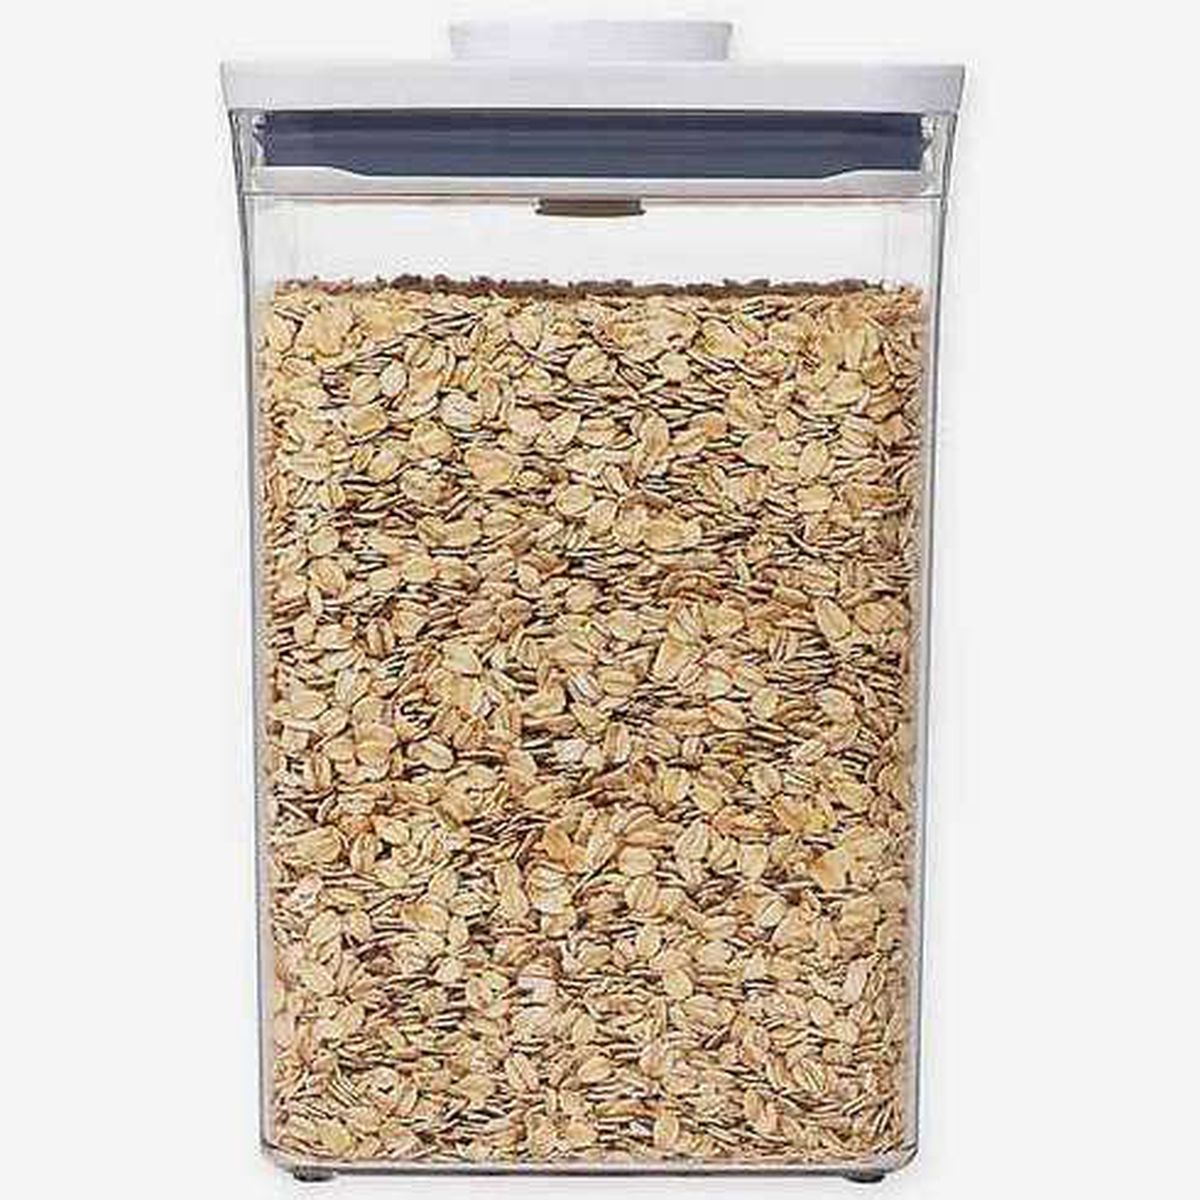 A clear plastic container full of oats